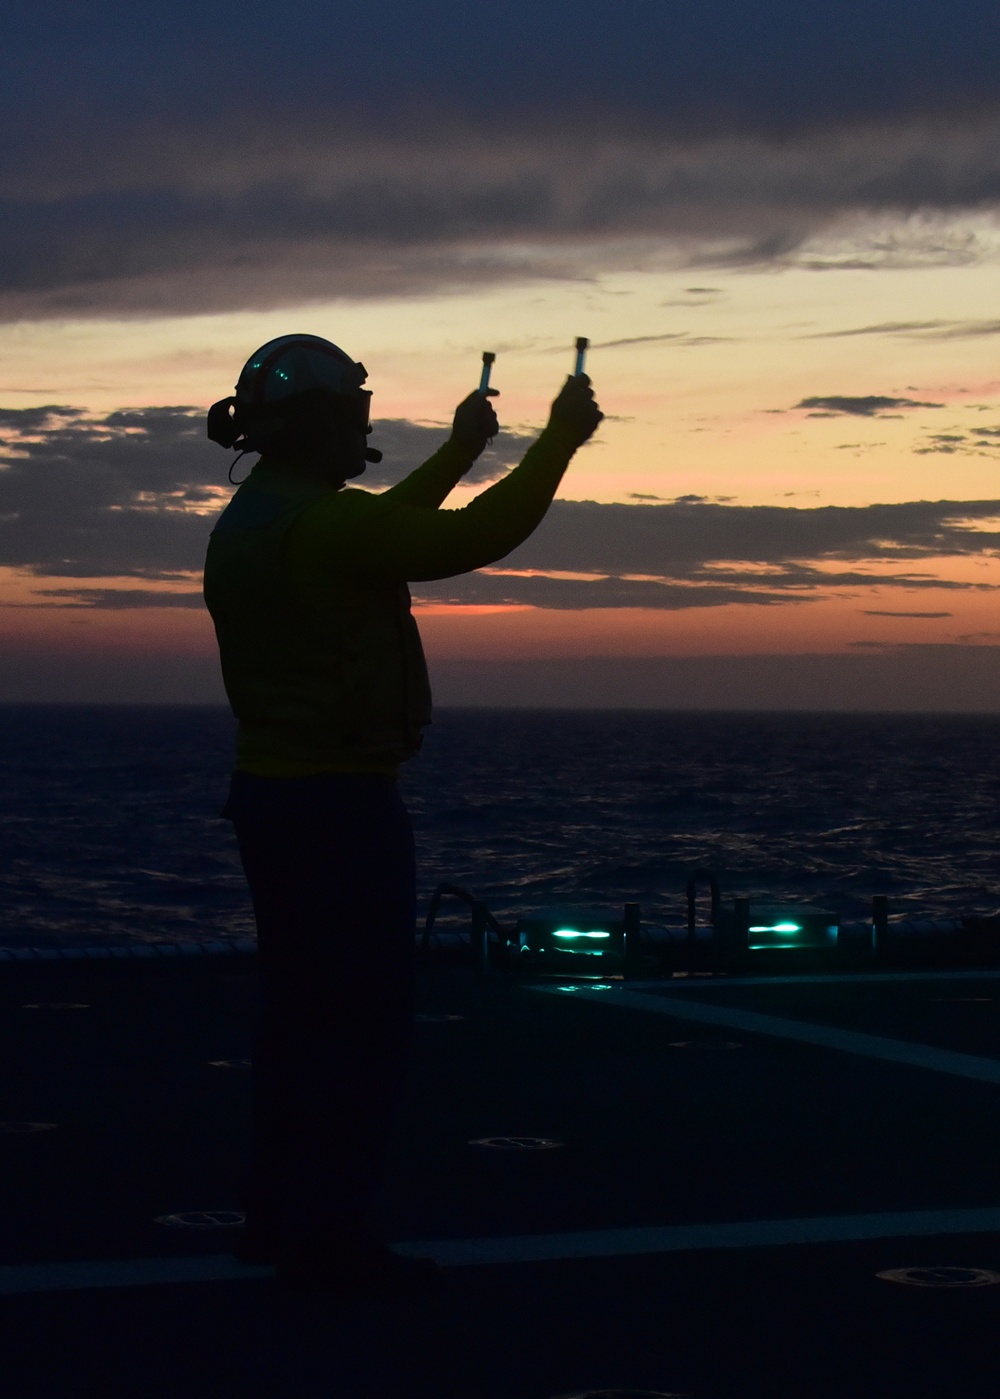 CGC Bertholf conducts night flight operations during Western Pacific deployment